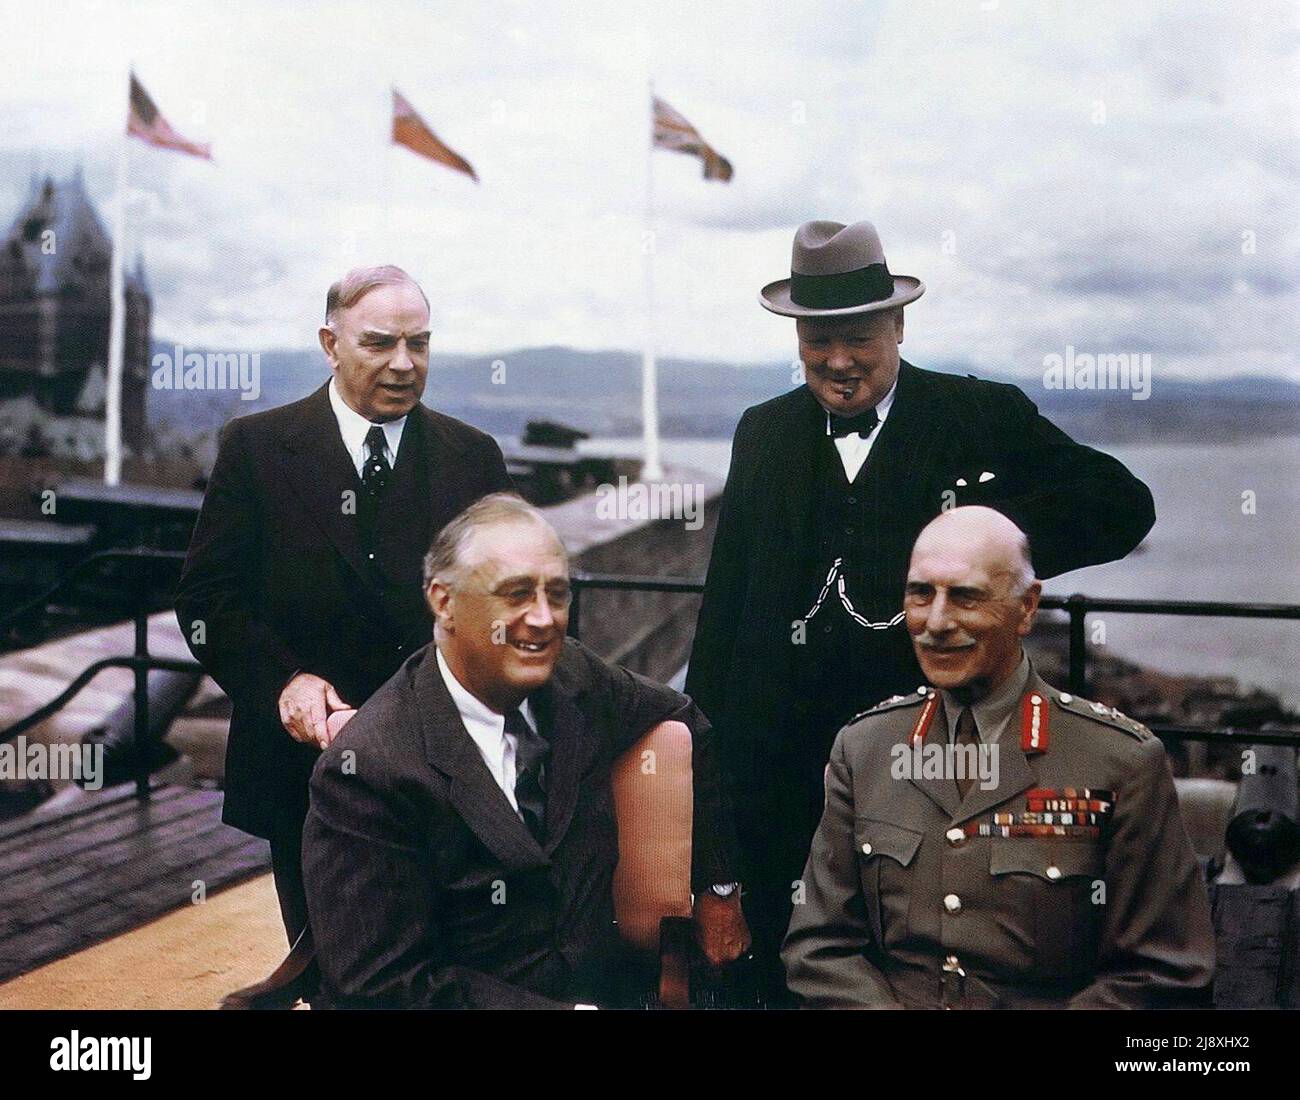 William Lyon Mackenzie King, Prime Minister of Canada; Winston Churchill, Prime Minister of the United Kingdom; Franklin D. Roosevelt, President of the United States of America; and Major-General Sir Alexander Cambridge, 1st Earl of Athlone, Governor-General of Canada, on the terrace of the Citadel in Quebec, Canada during the Quebec Conference in which the invasion strategy for Normandy was discussed  ca.  1943 Stock Photo